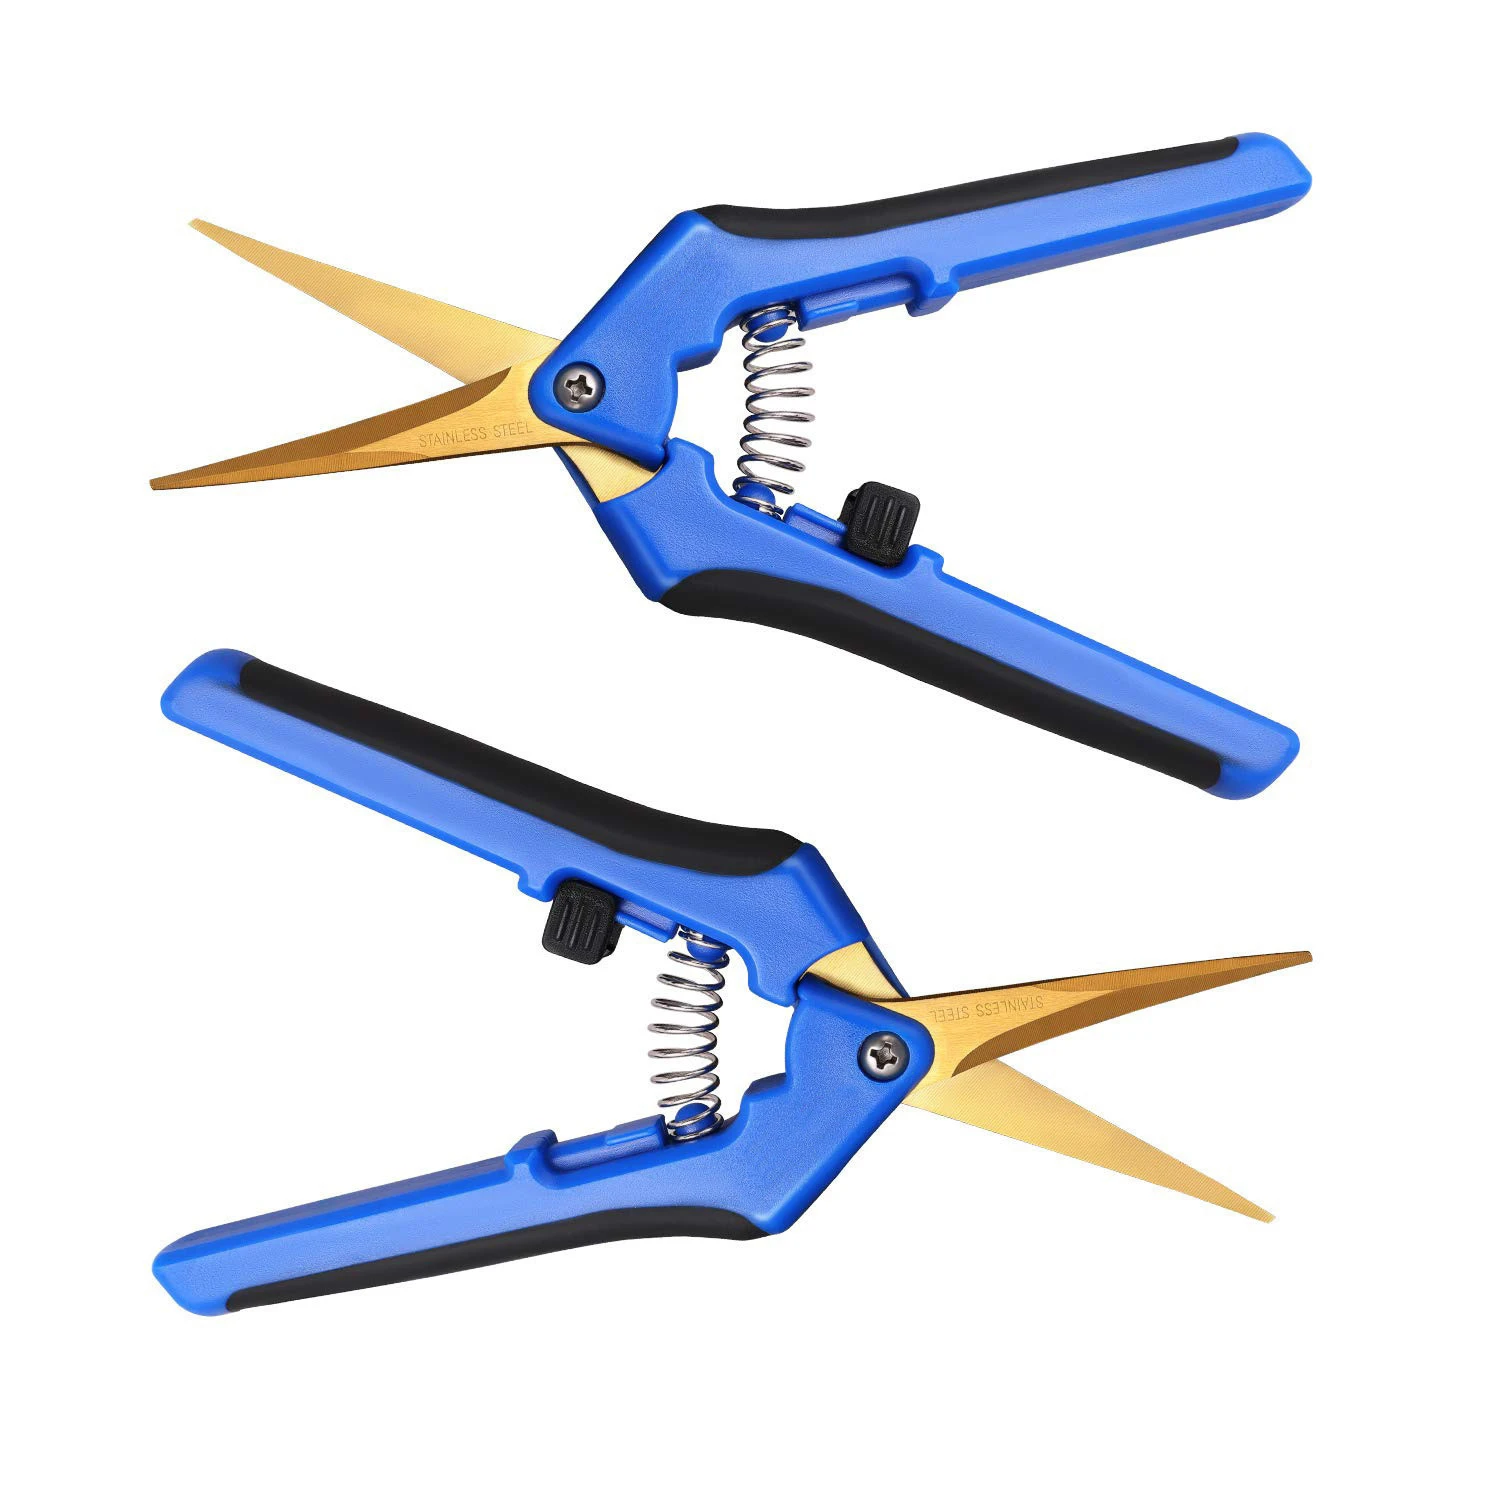 CHIN-UP Gardening Hand Pruner Pruning Shear with Titanium Coated Curved Precision Blades